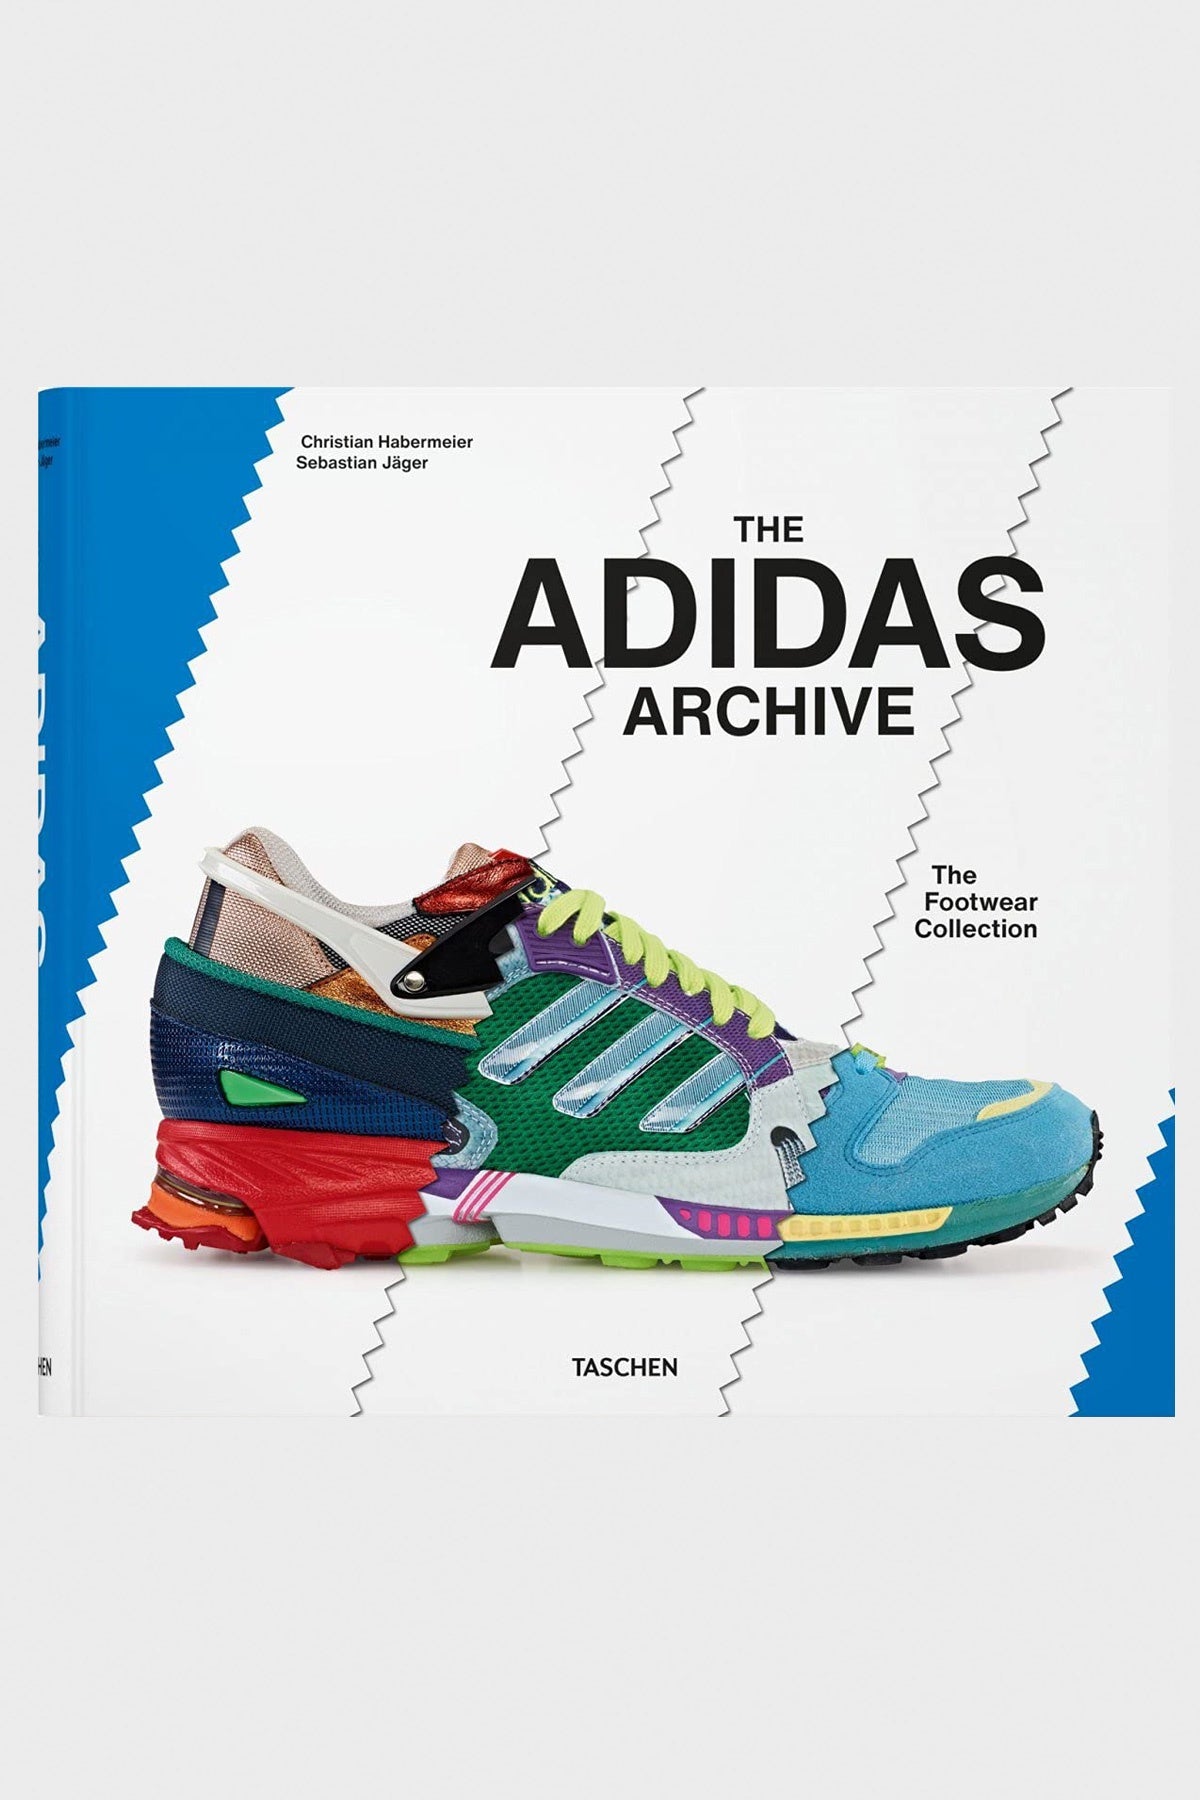 The Adidas Archive - the Footwear Collection